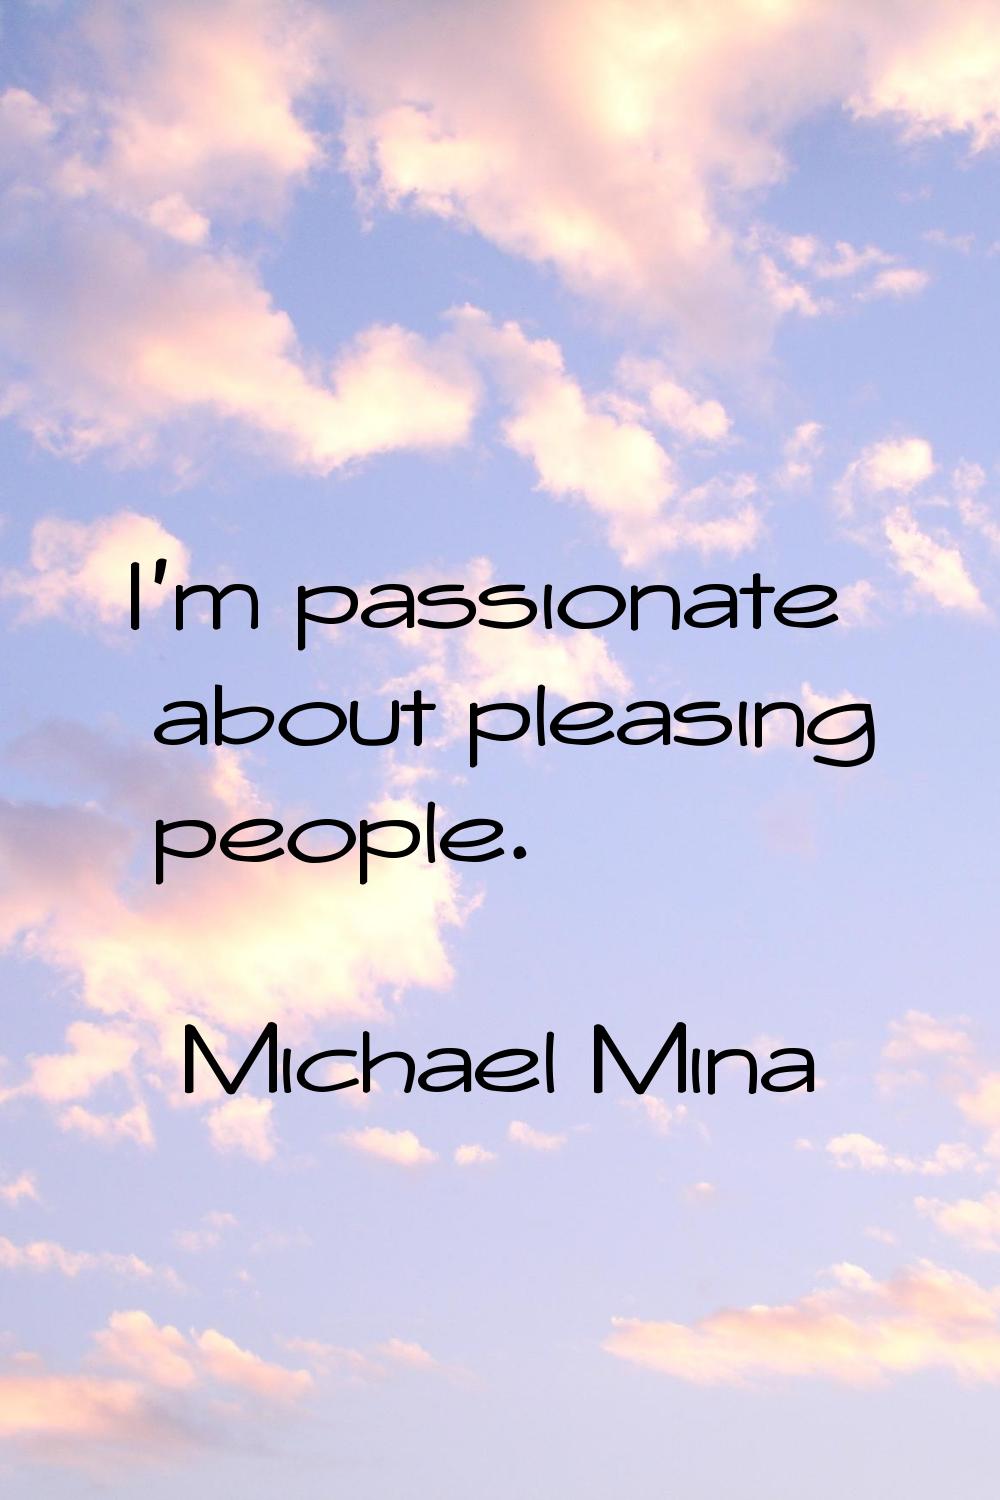 I'm passionate about pleasing people.